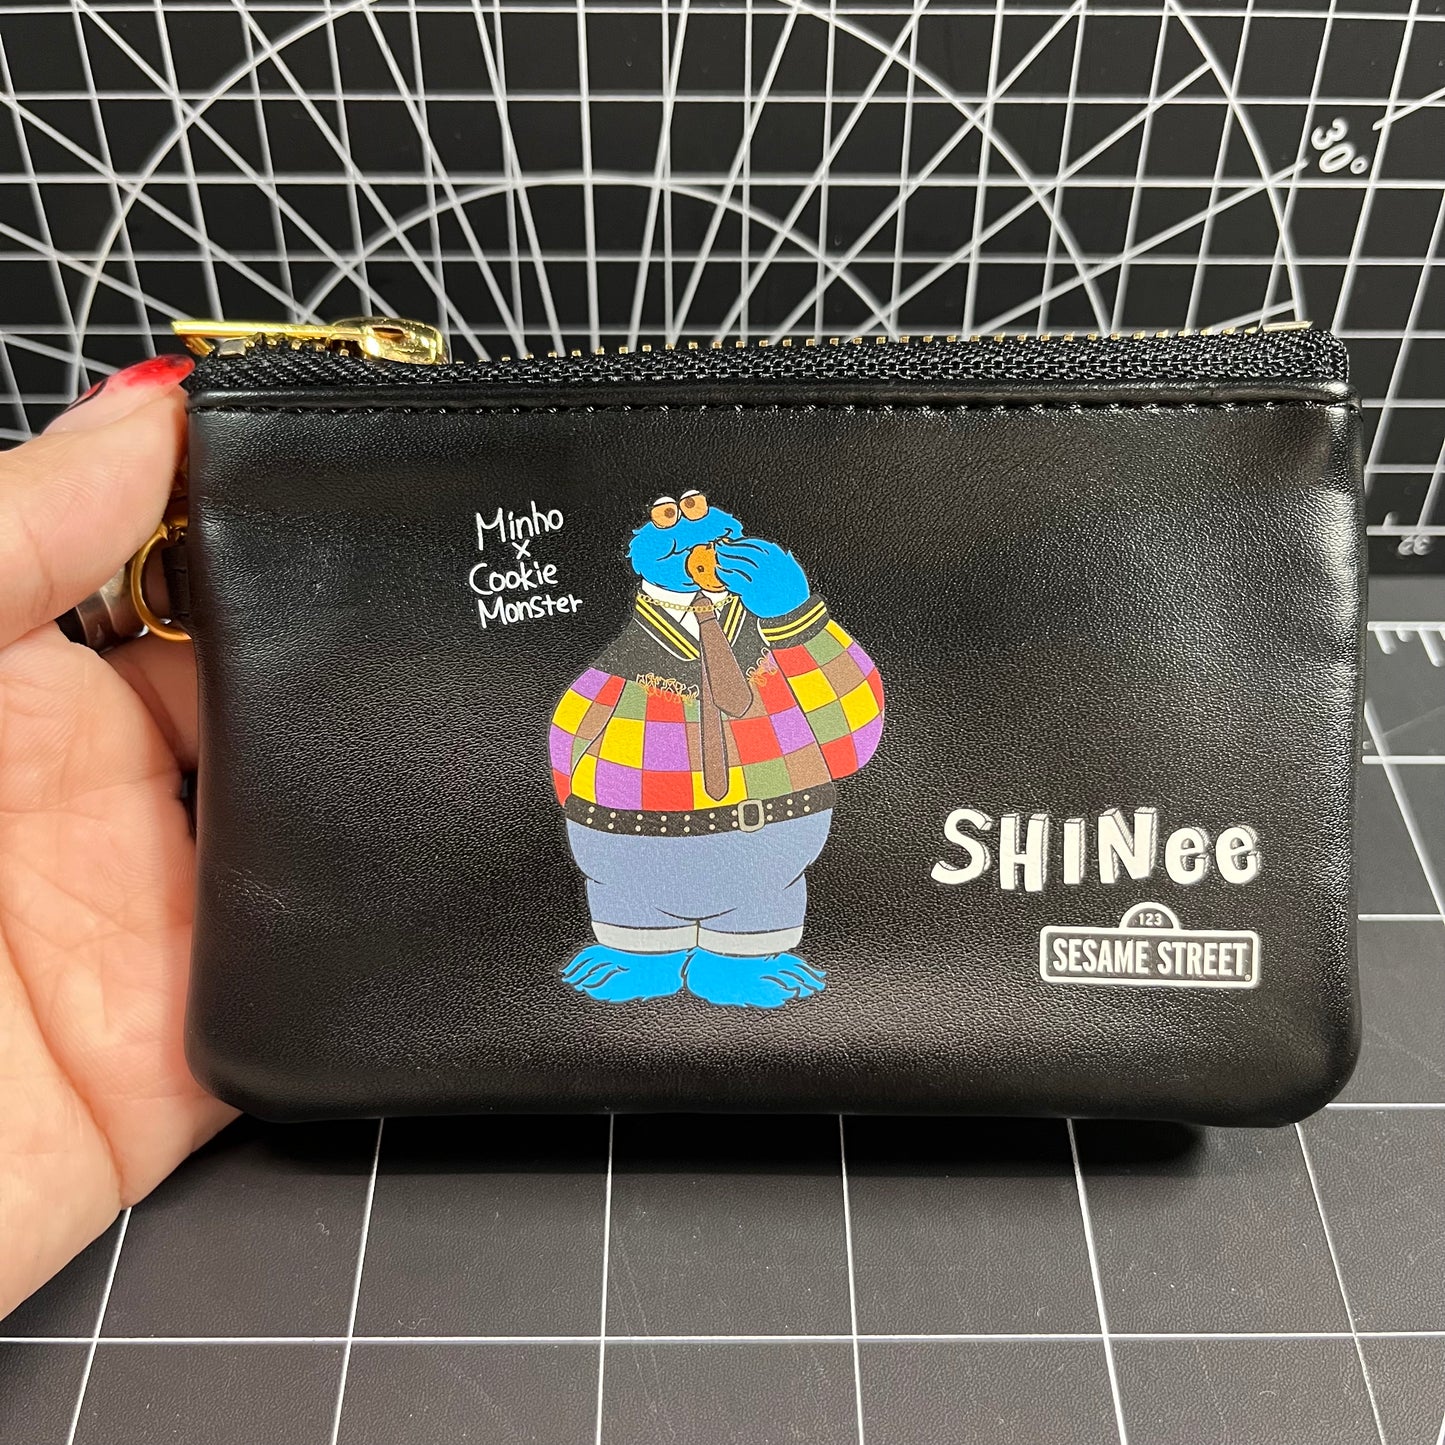 SHINee X Sesame Street Collaboration - Minho Cookie Monster Small Pouch